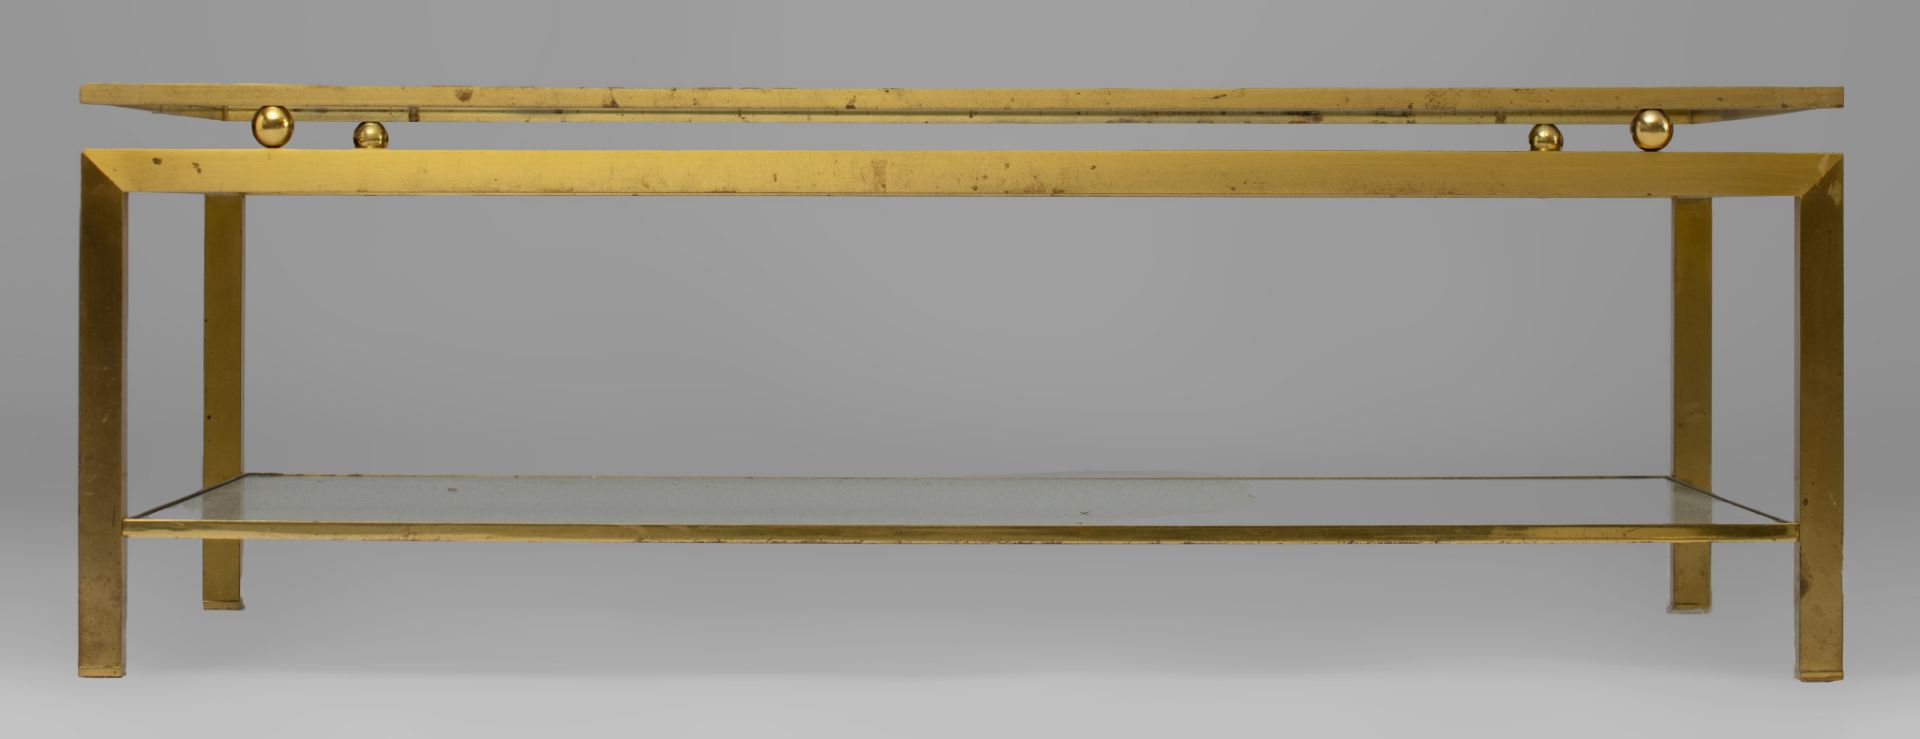 A vintage polished brass and glass coffee table by Maison Jansen, H 40 - W 120 - D 80 cm - Image 2 of 5